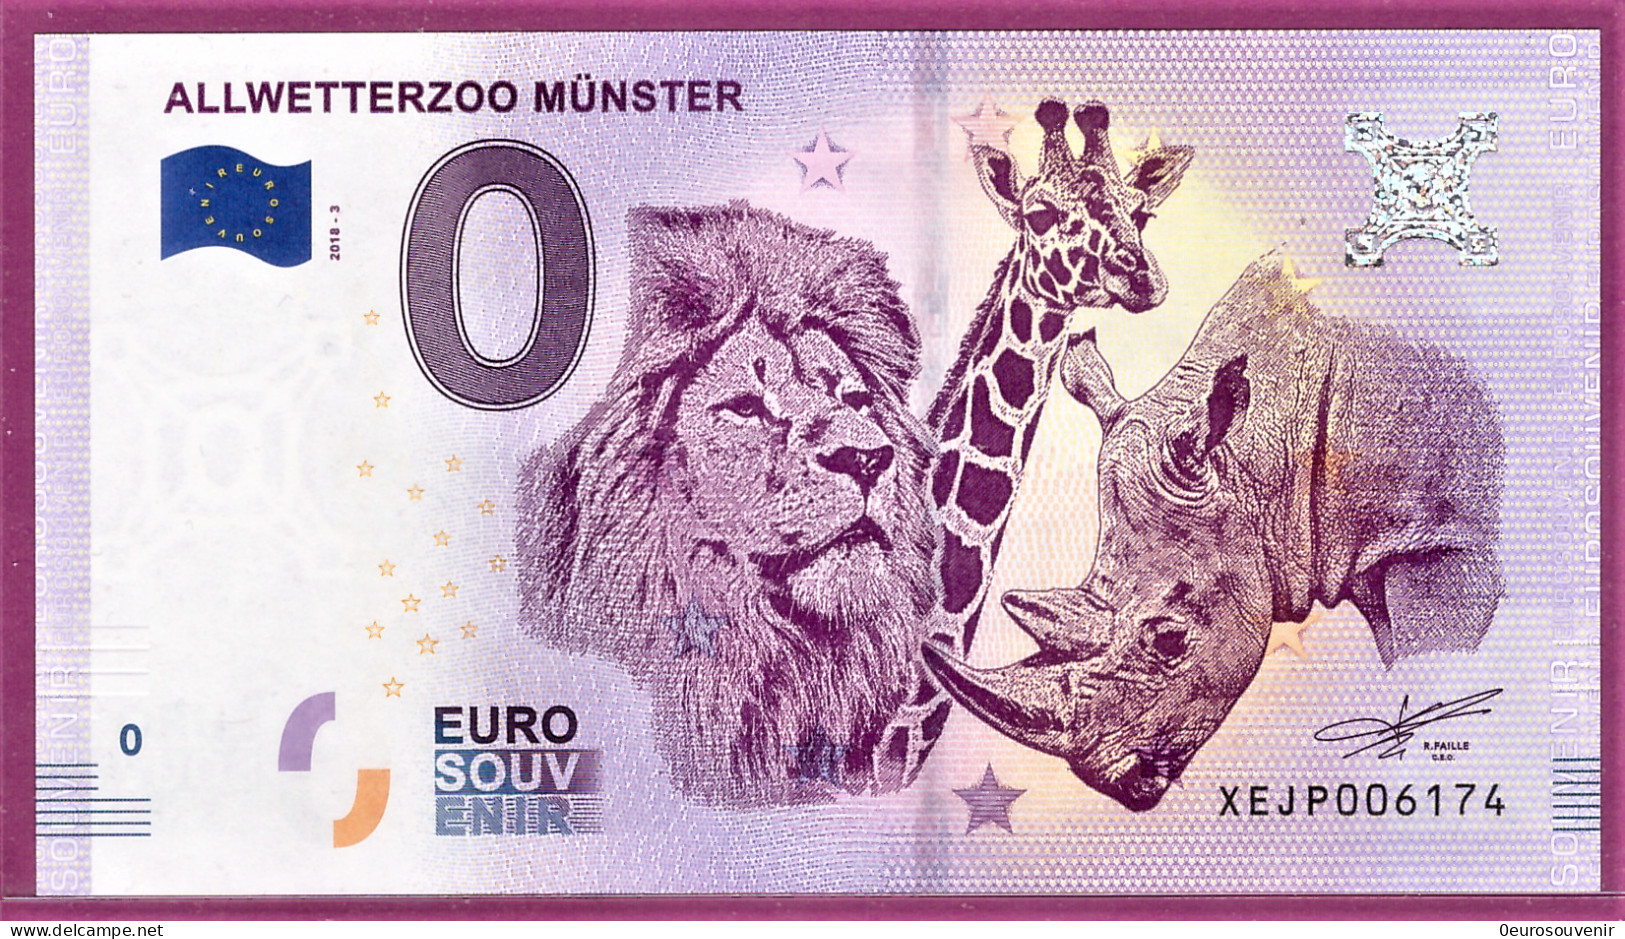 0-Euro XEJP 2018-3 ALLWETTERZOO MÜNSTER - Private Proofs / Unofficial